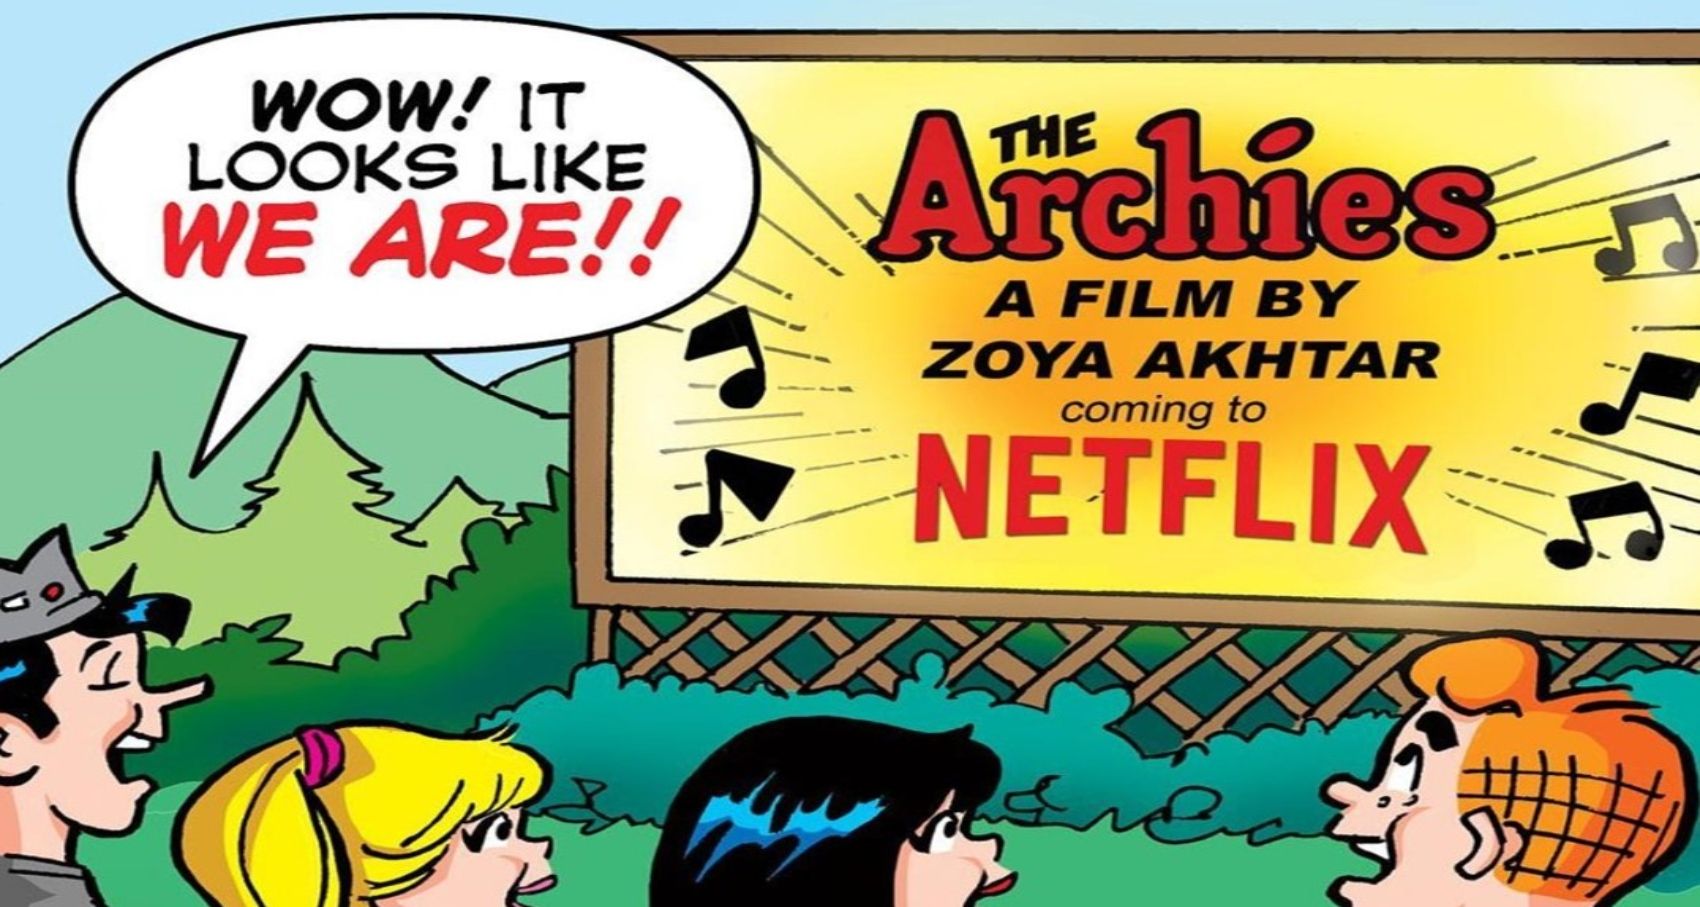 The Archies India